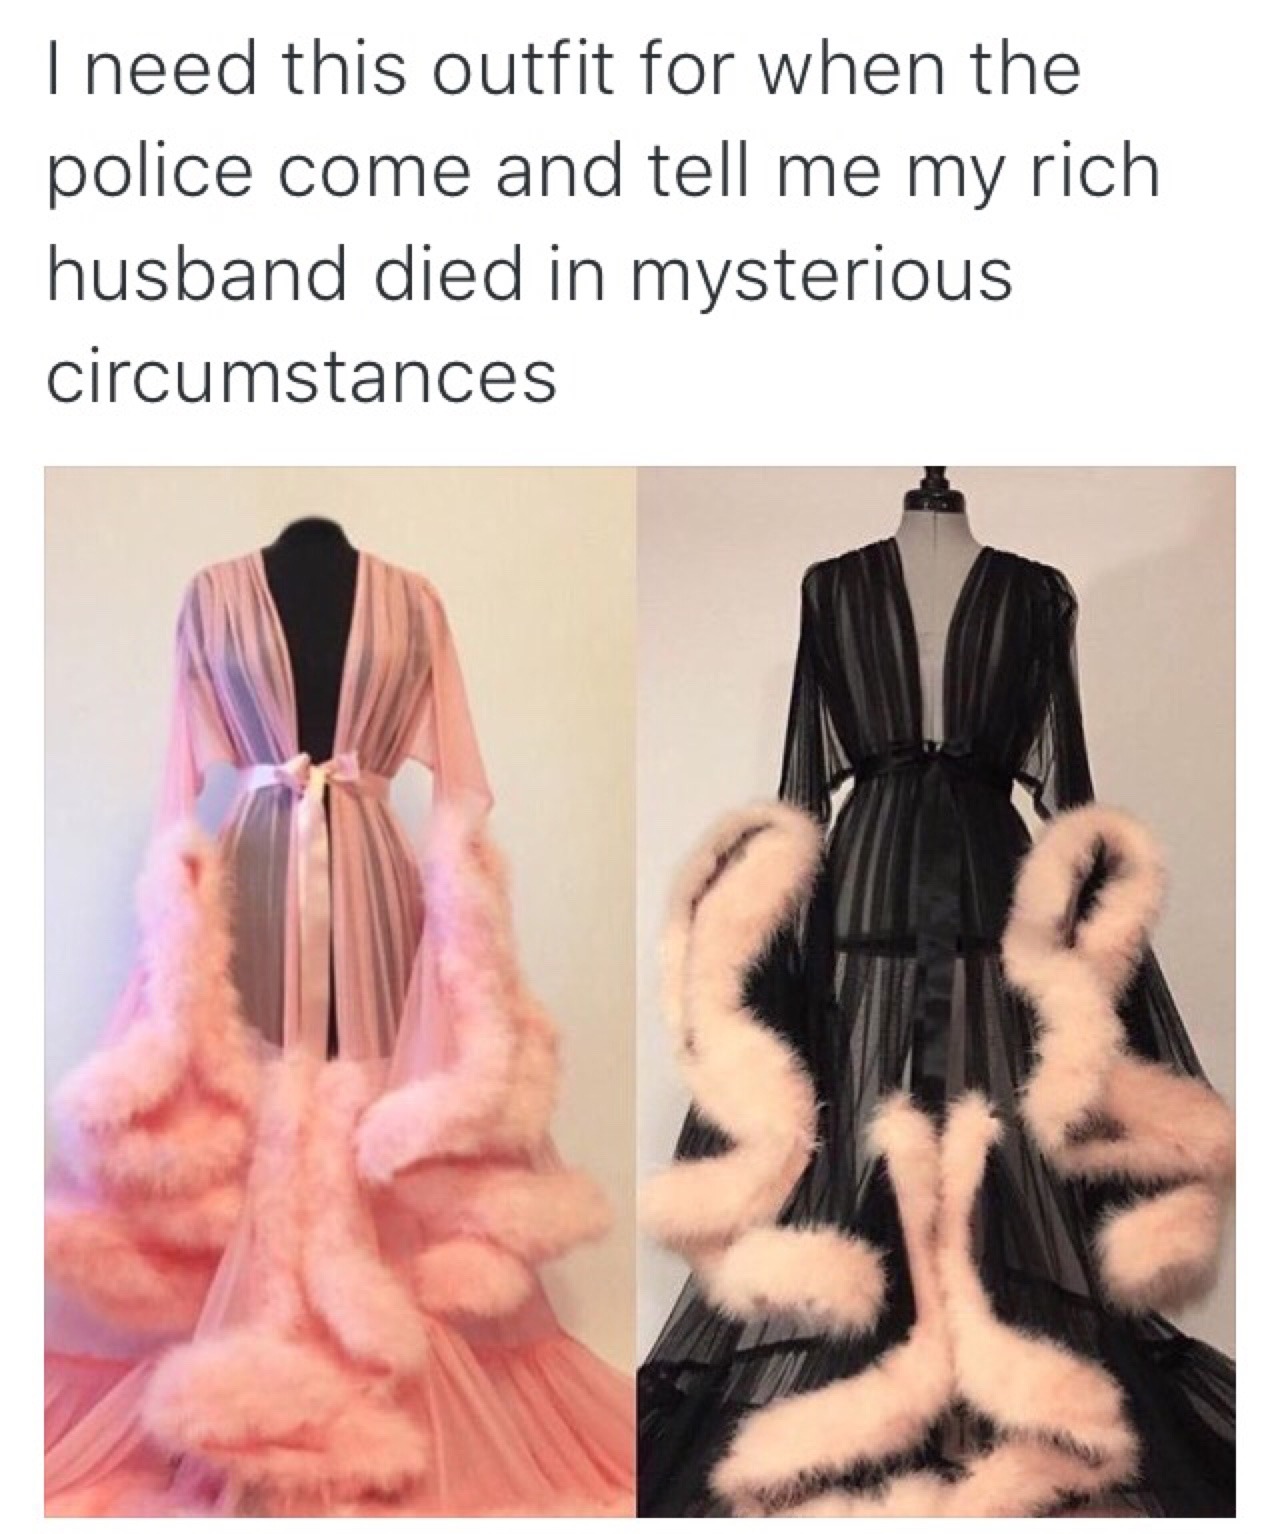 catsaresocuteicanteven:  You walk out in the pink one, listen to the police, gasp